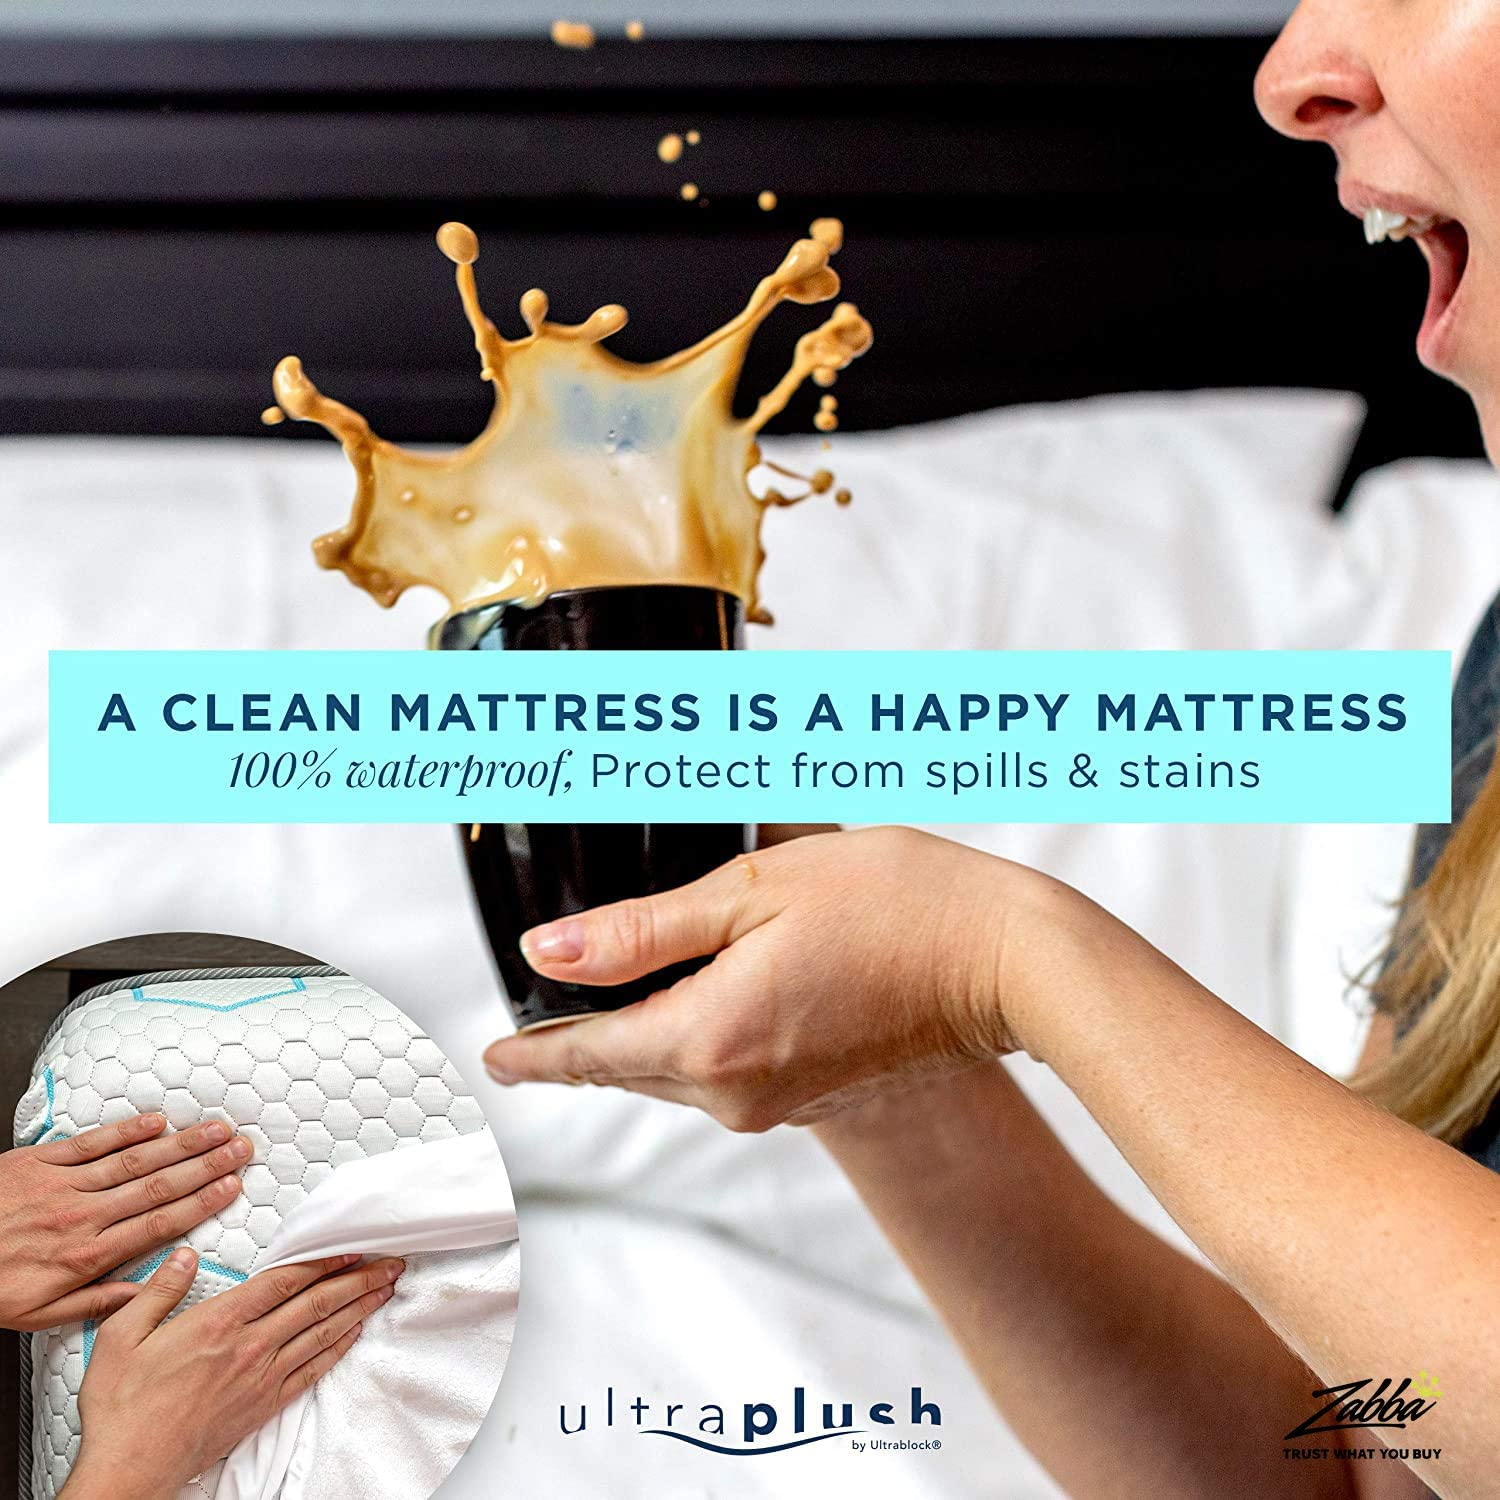 How often should you replace a mattress protector? It depends on usage.